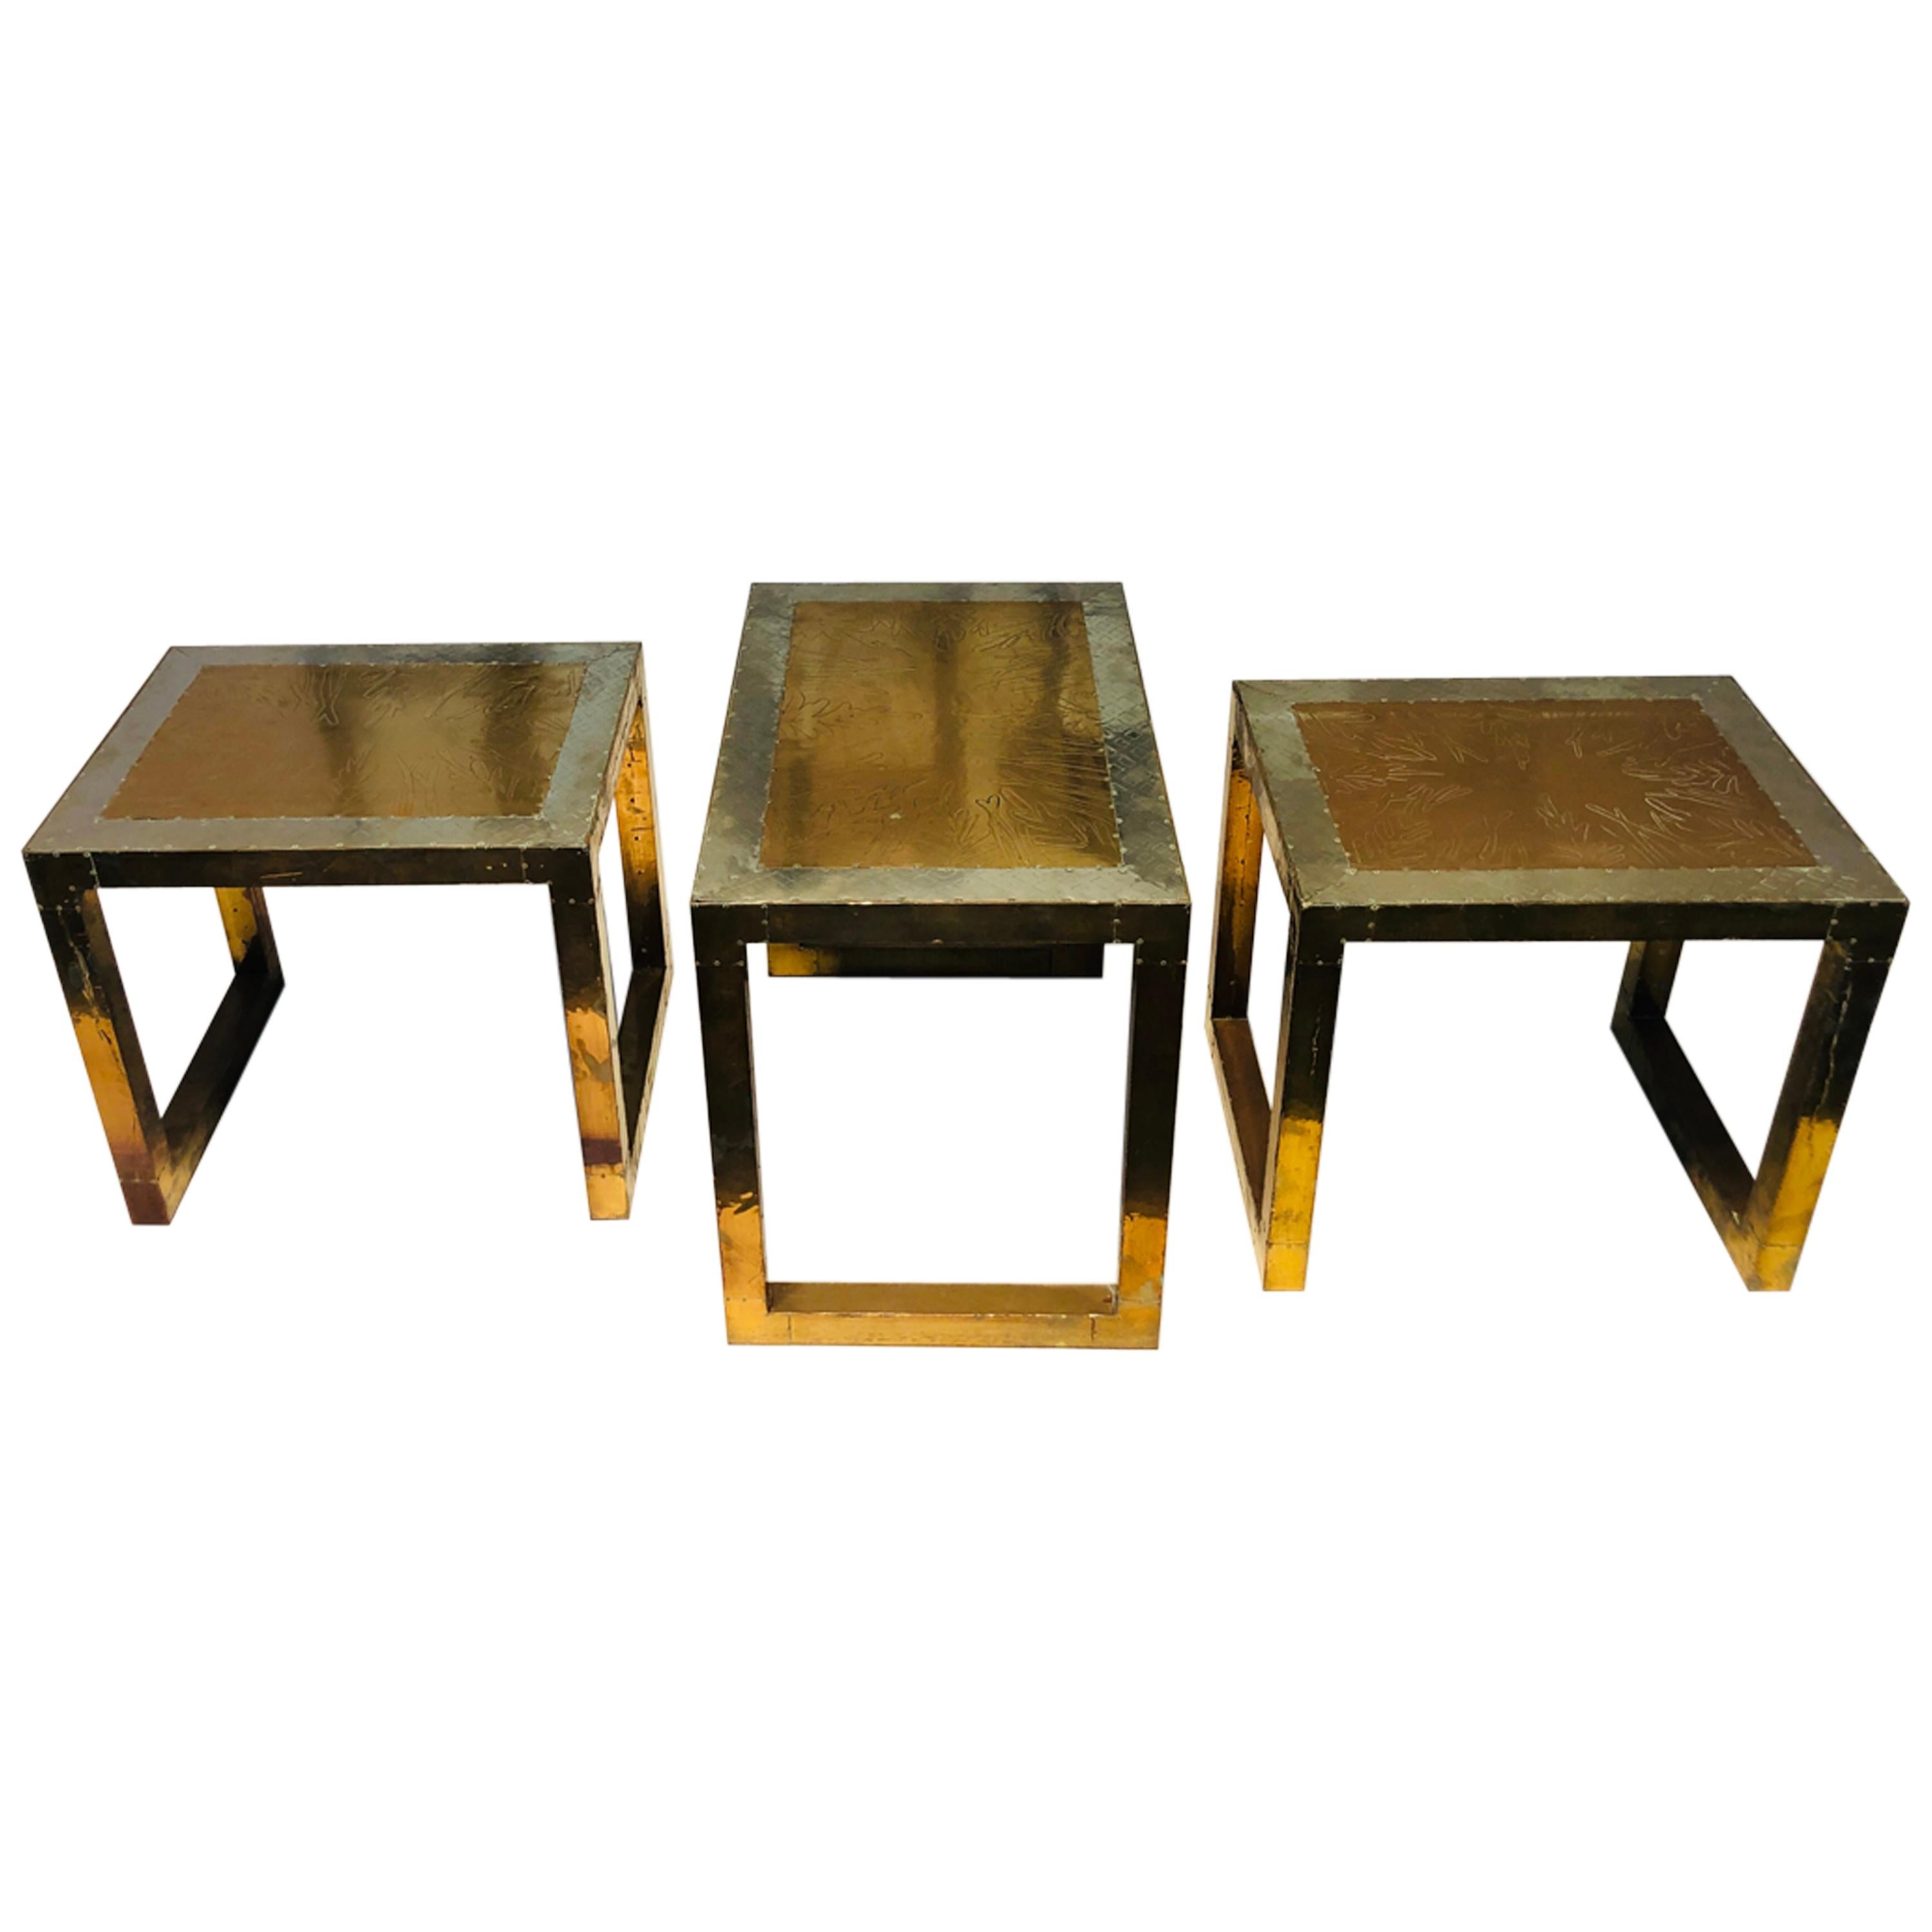 Vintage Spanish Set of Three Golden Metal Sofa Tables Signed by Rudolfo Dubarry For Sale